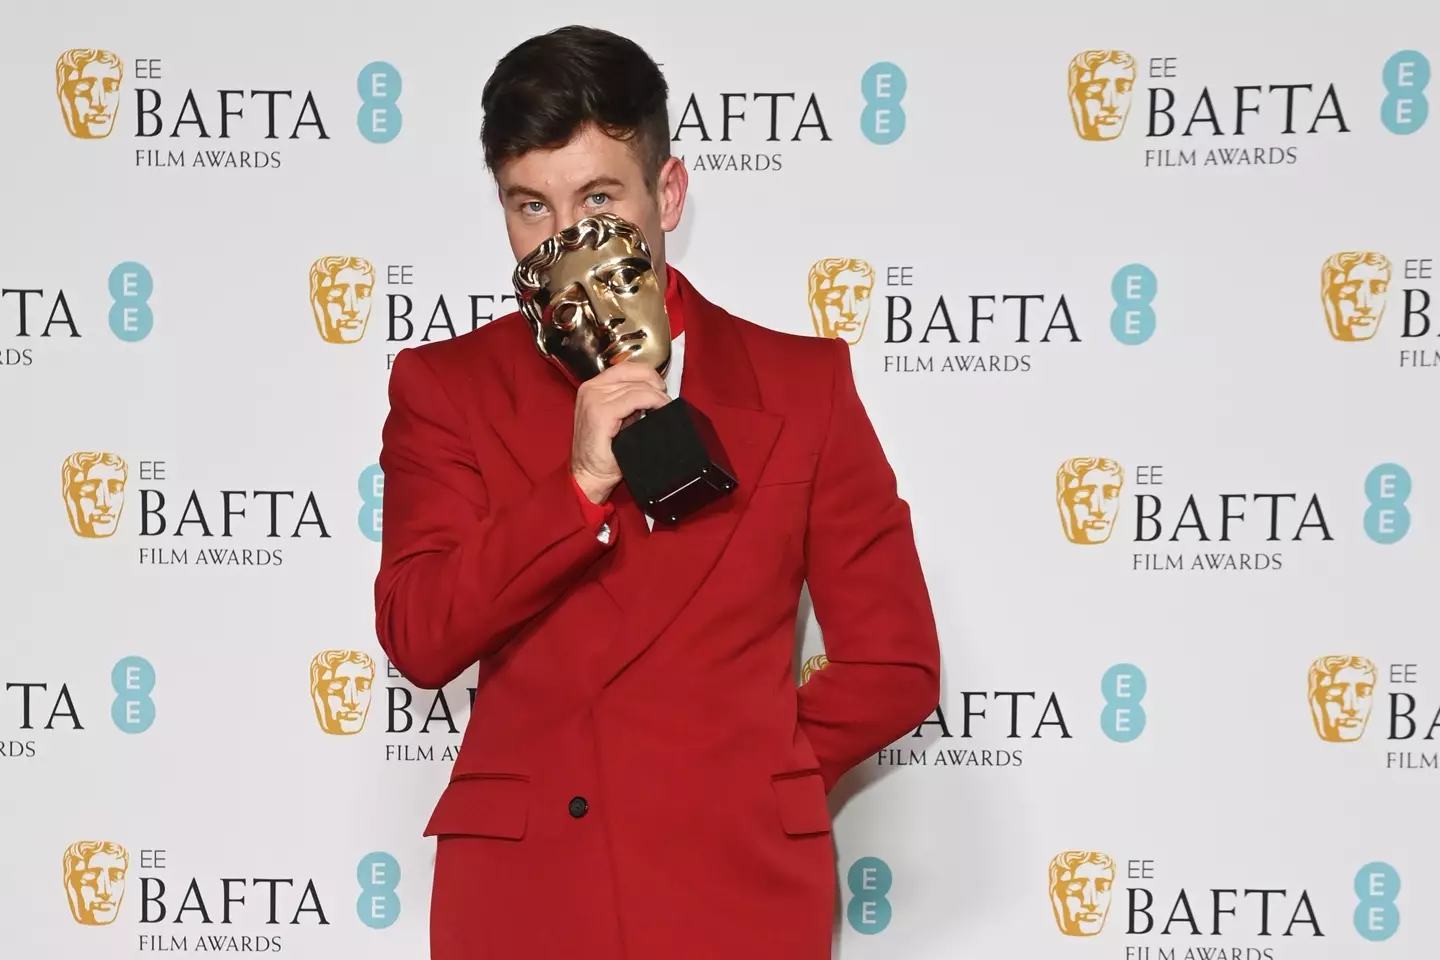 Barry Keoghan doing what everyone who wins a BAFTA ought to do, seeing if the award fits on their face like a mask.